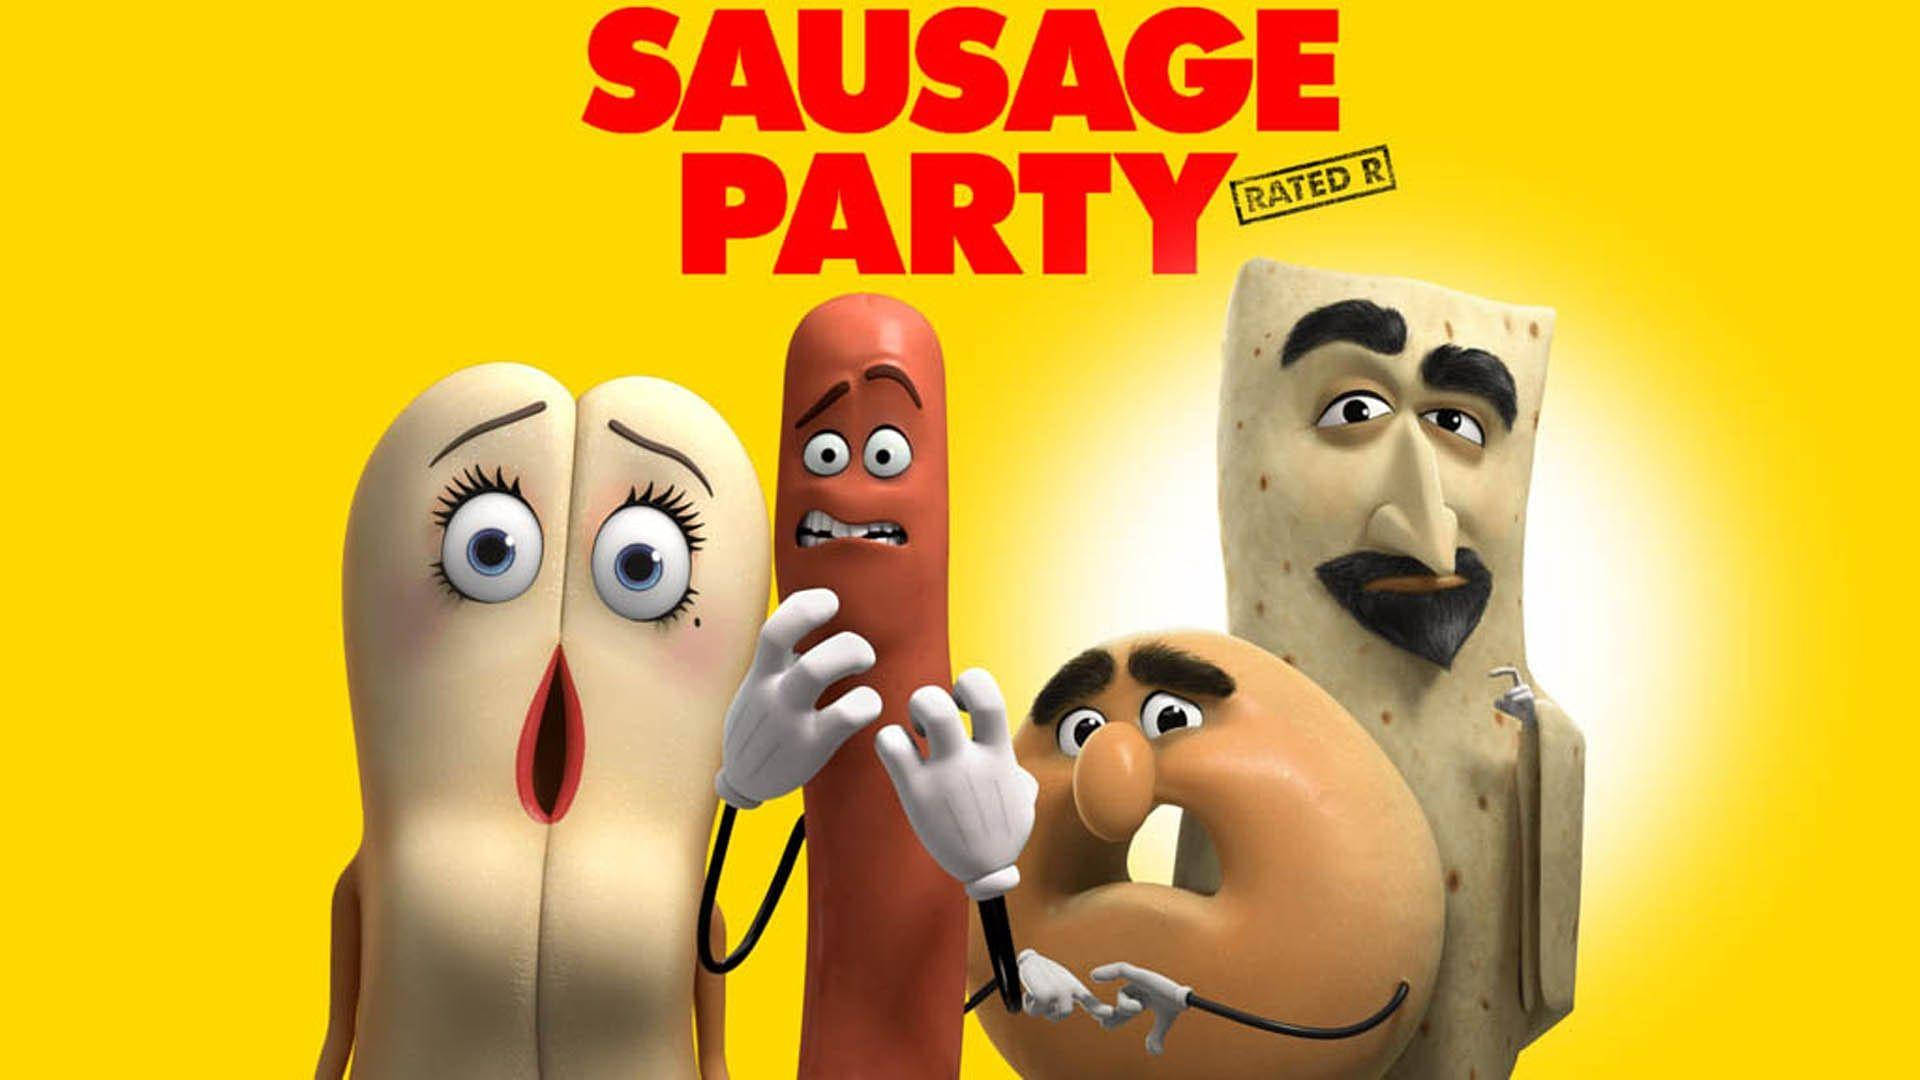 Sausage Party Movie Poster Background